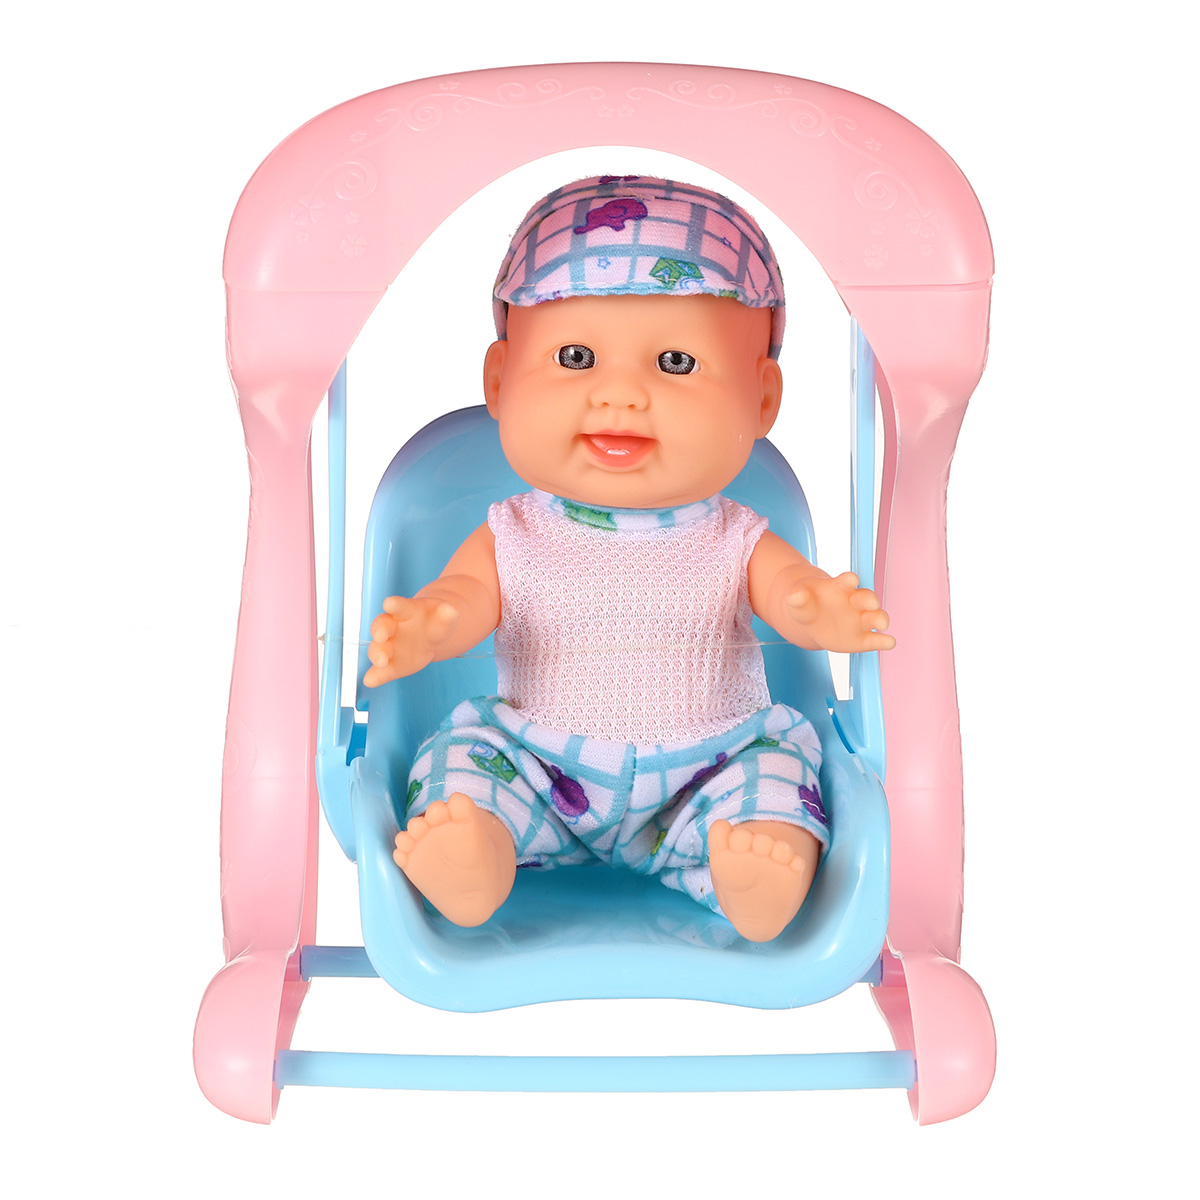 Simulation-Baby-3D-Creative-Cute-Doll-Play-House-Toy-Doll-Vinyl-Doll-Gift-1818655-14